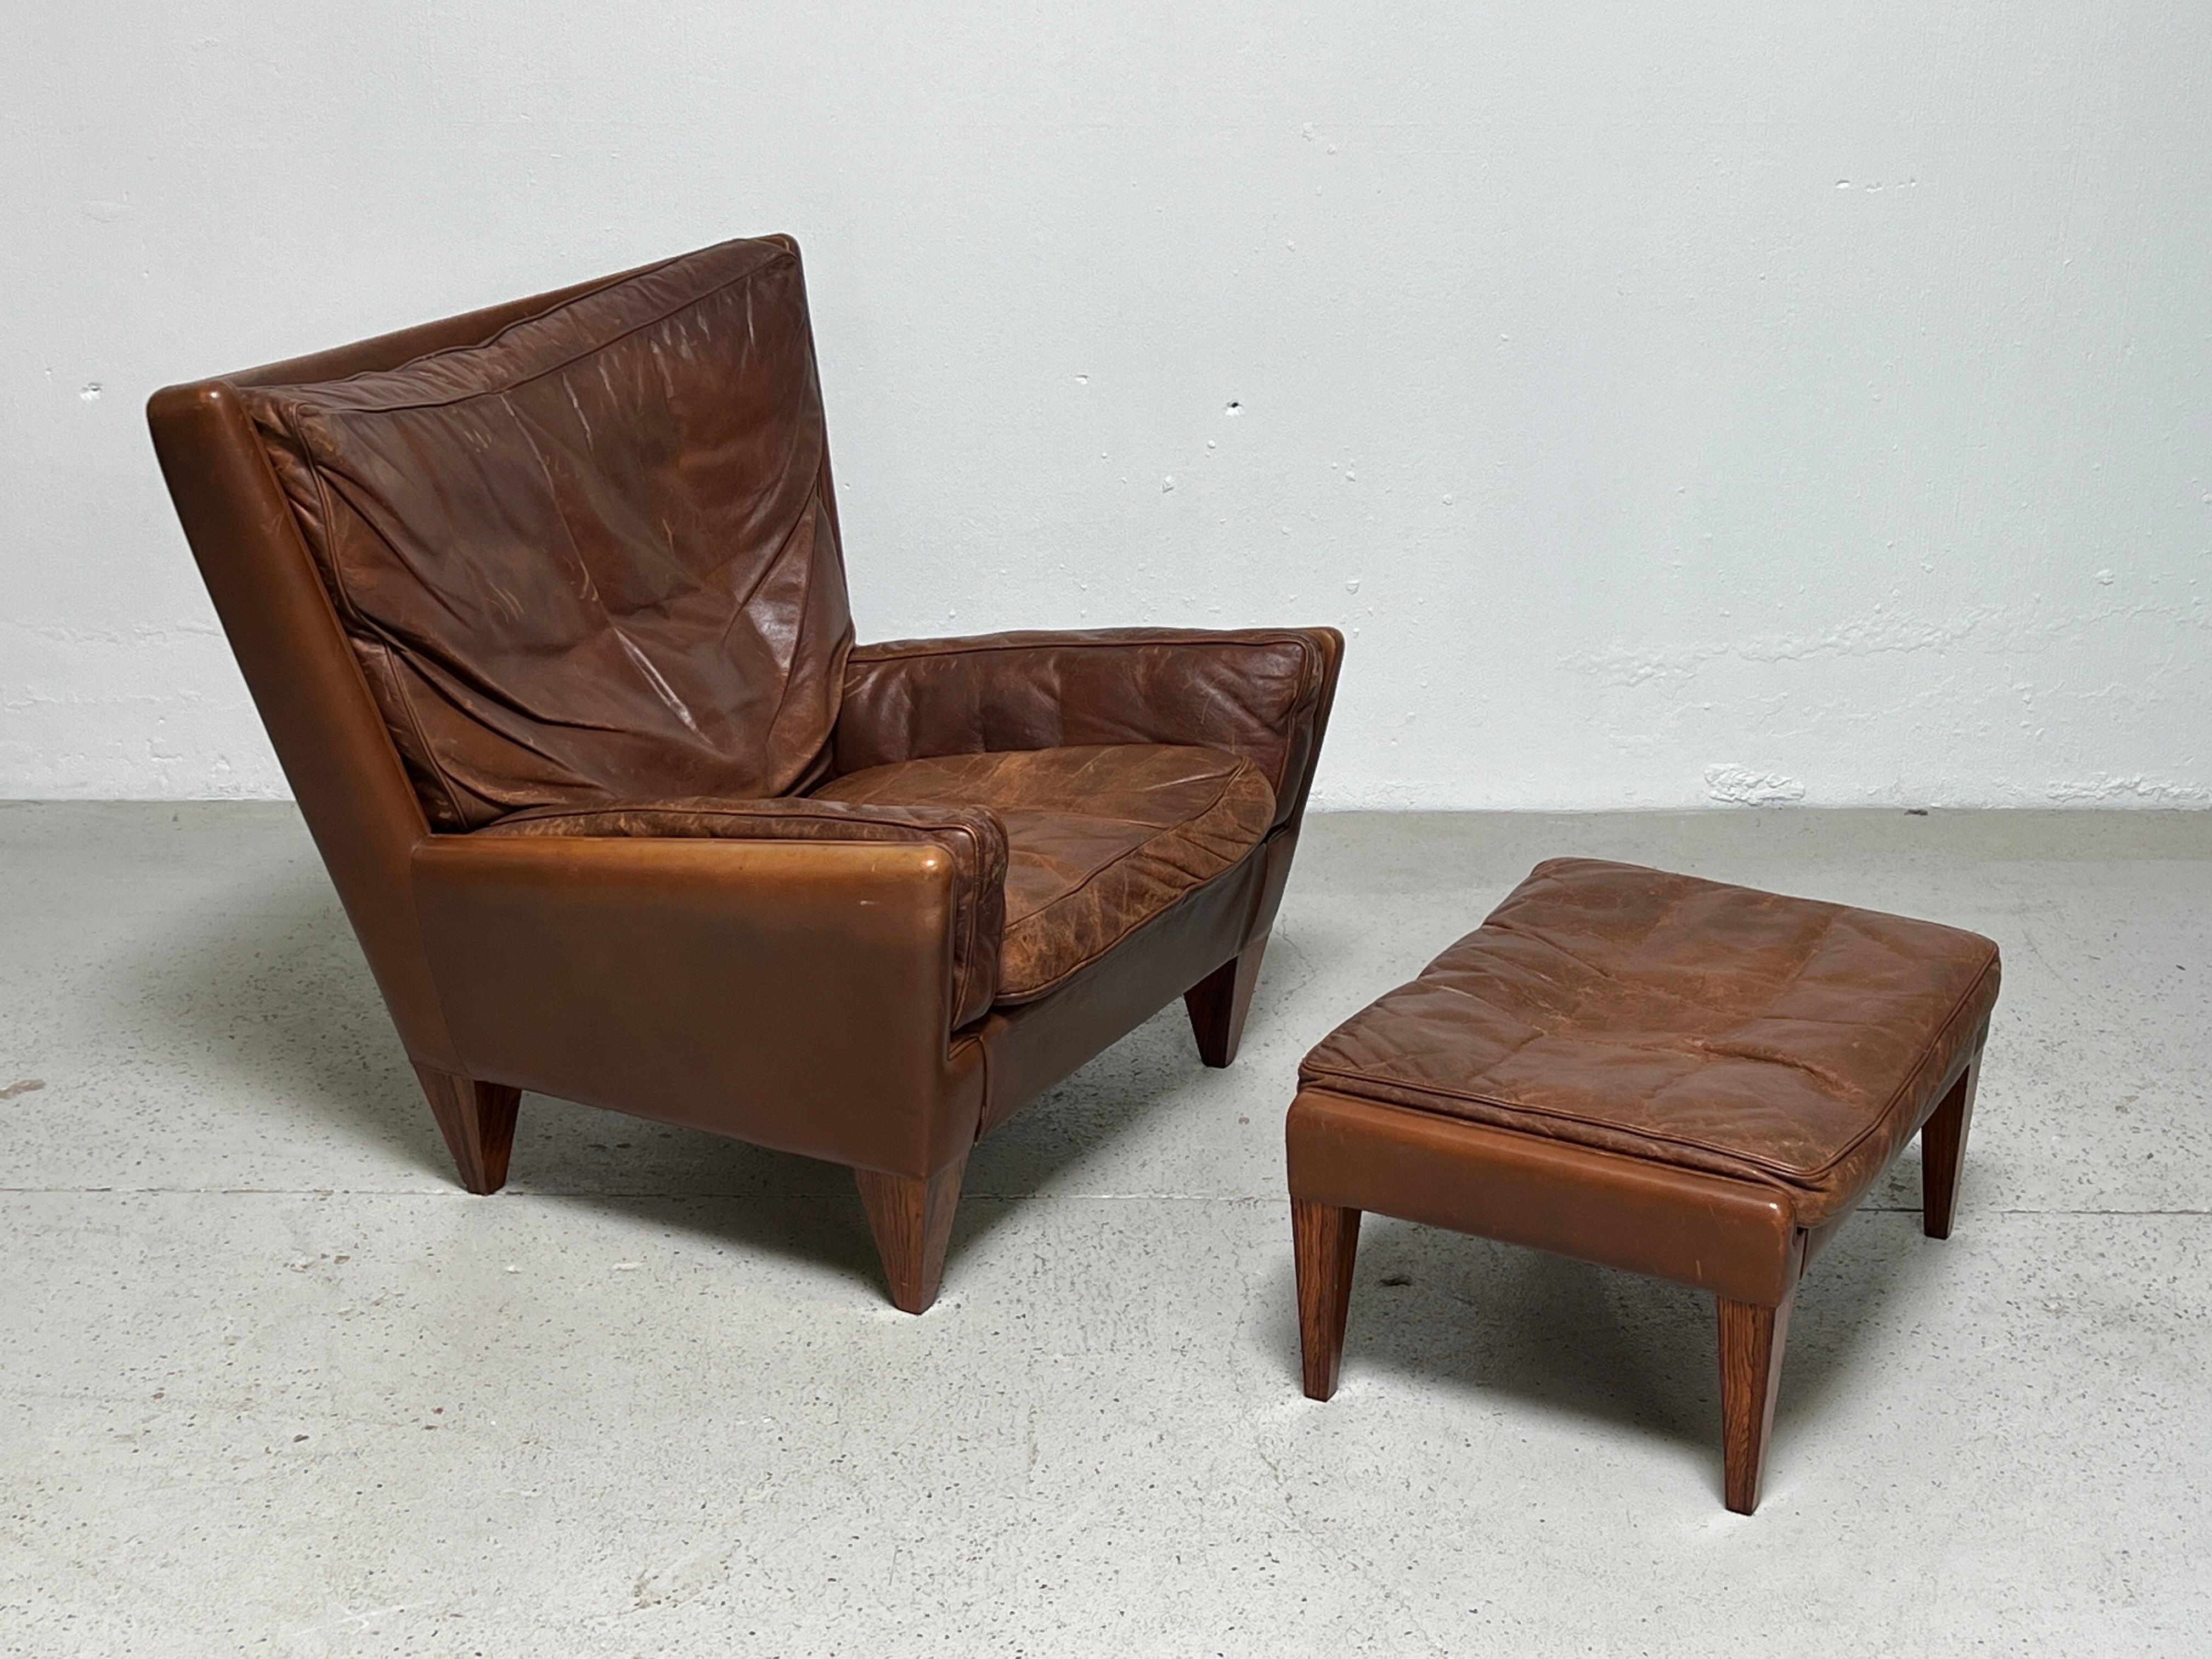 Illum Wikkelsø brown leather pyramid chair and ottoman for Holger Christiansen circa 1965. Beautiful patina to the original leather and rosewood.